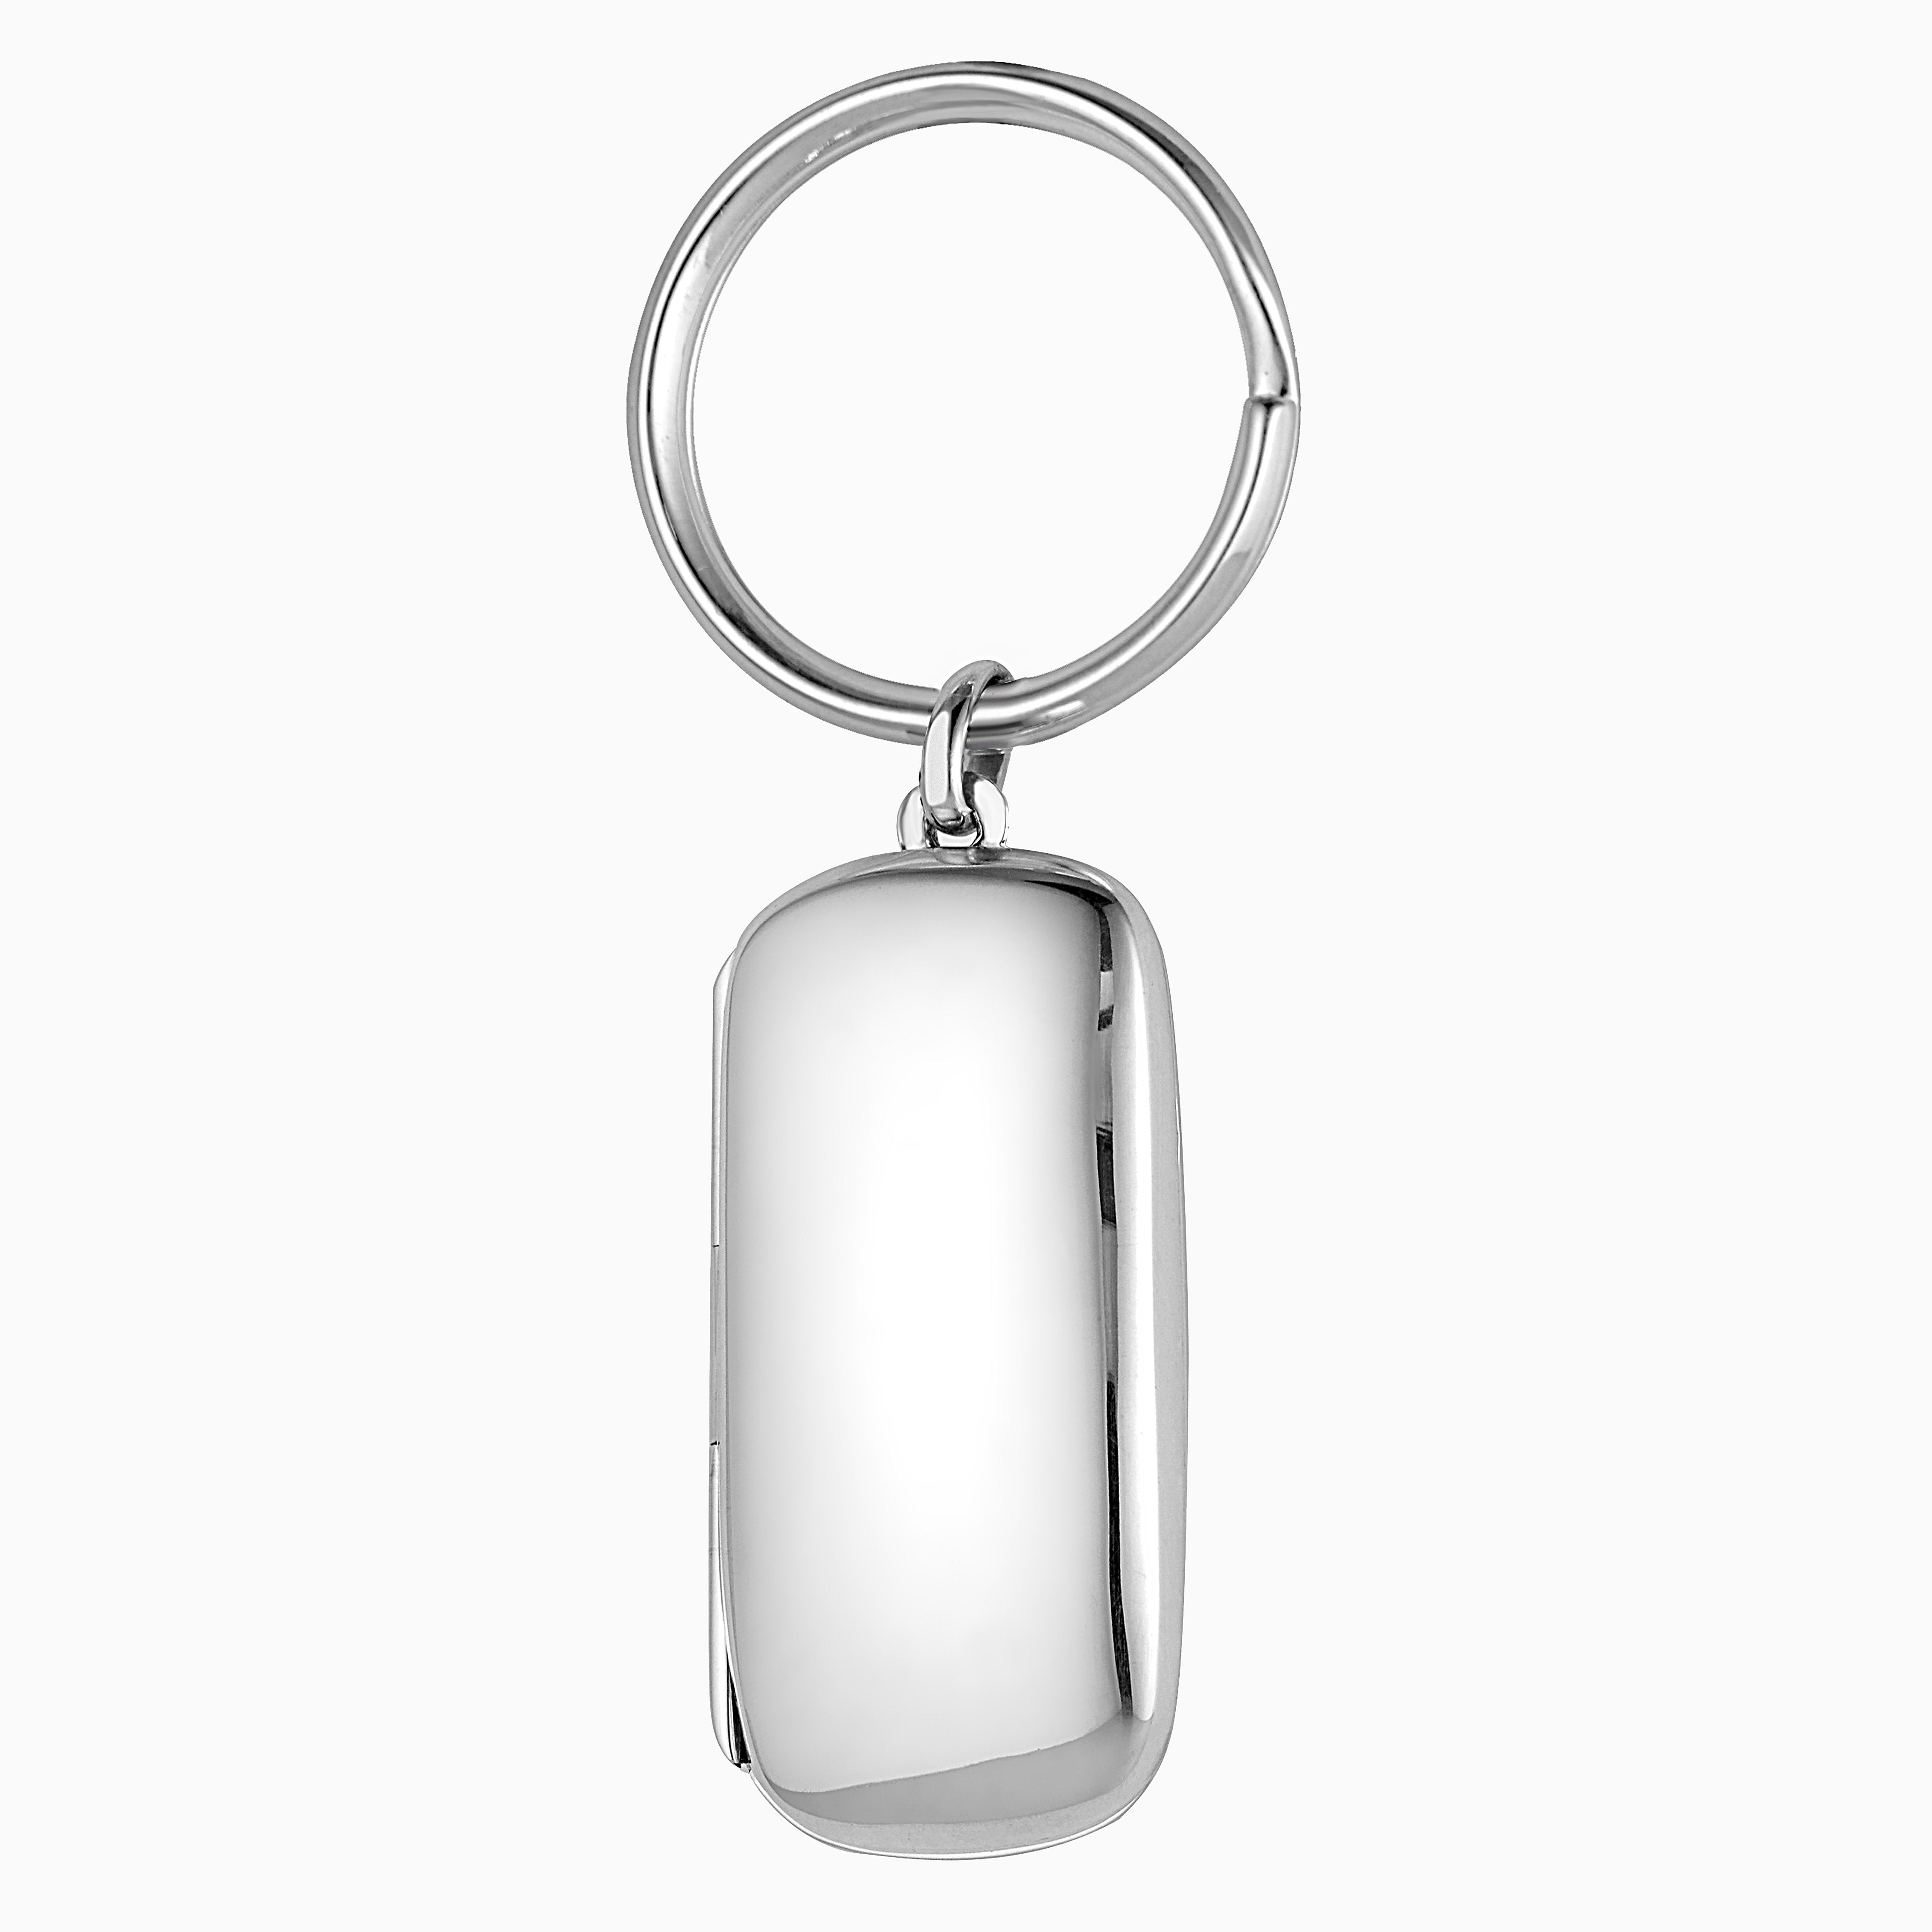 Product title: Silver Dog Tag Keyring, product type: Keyring